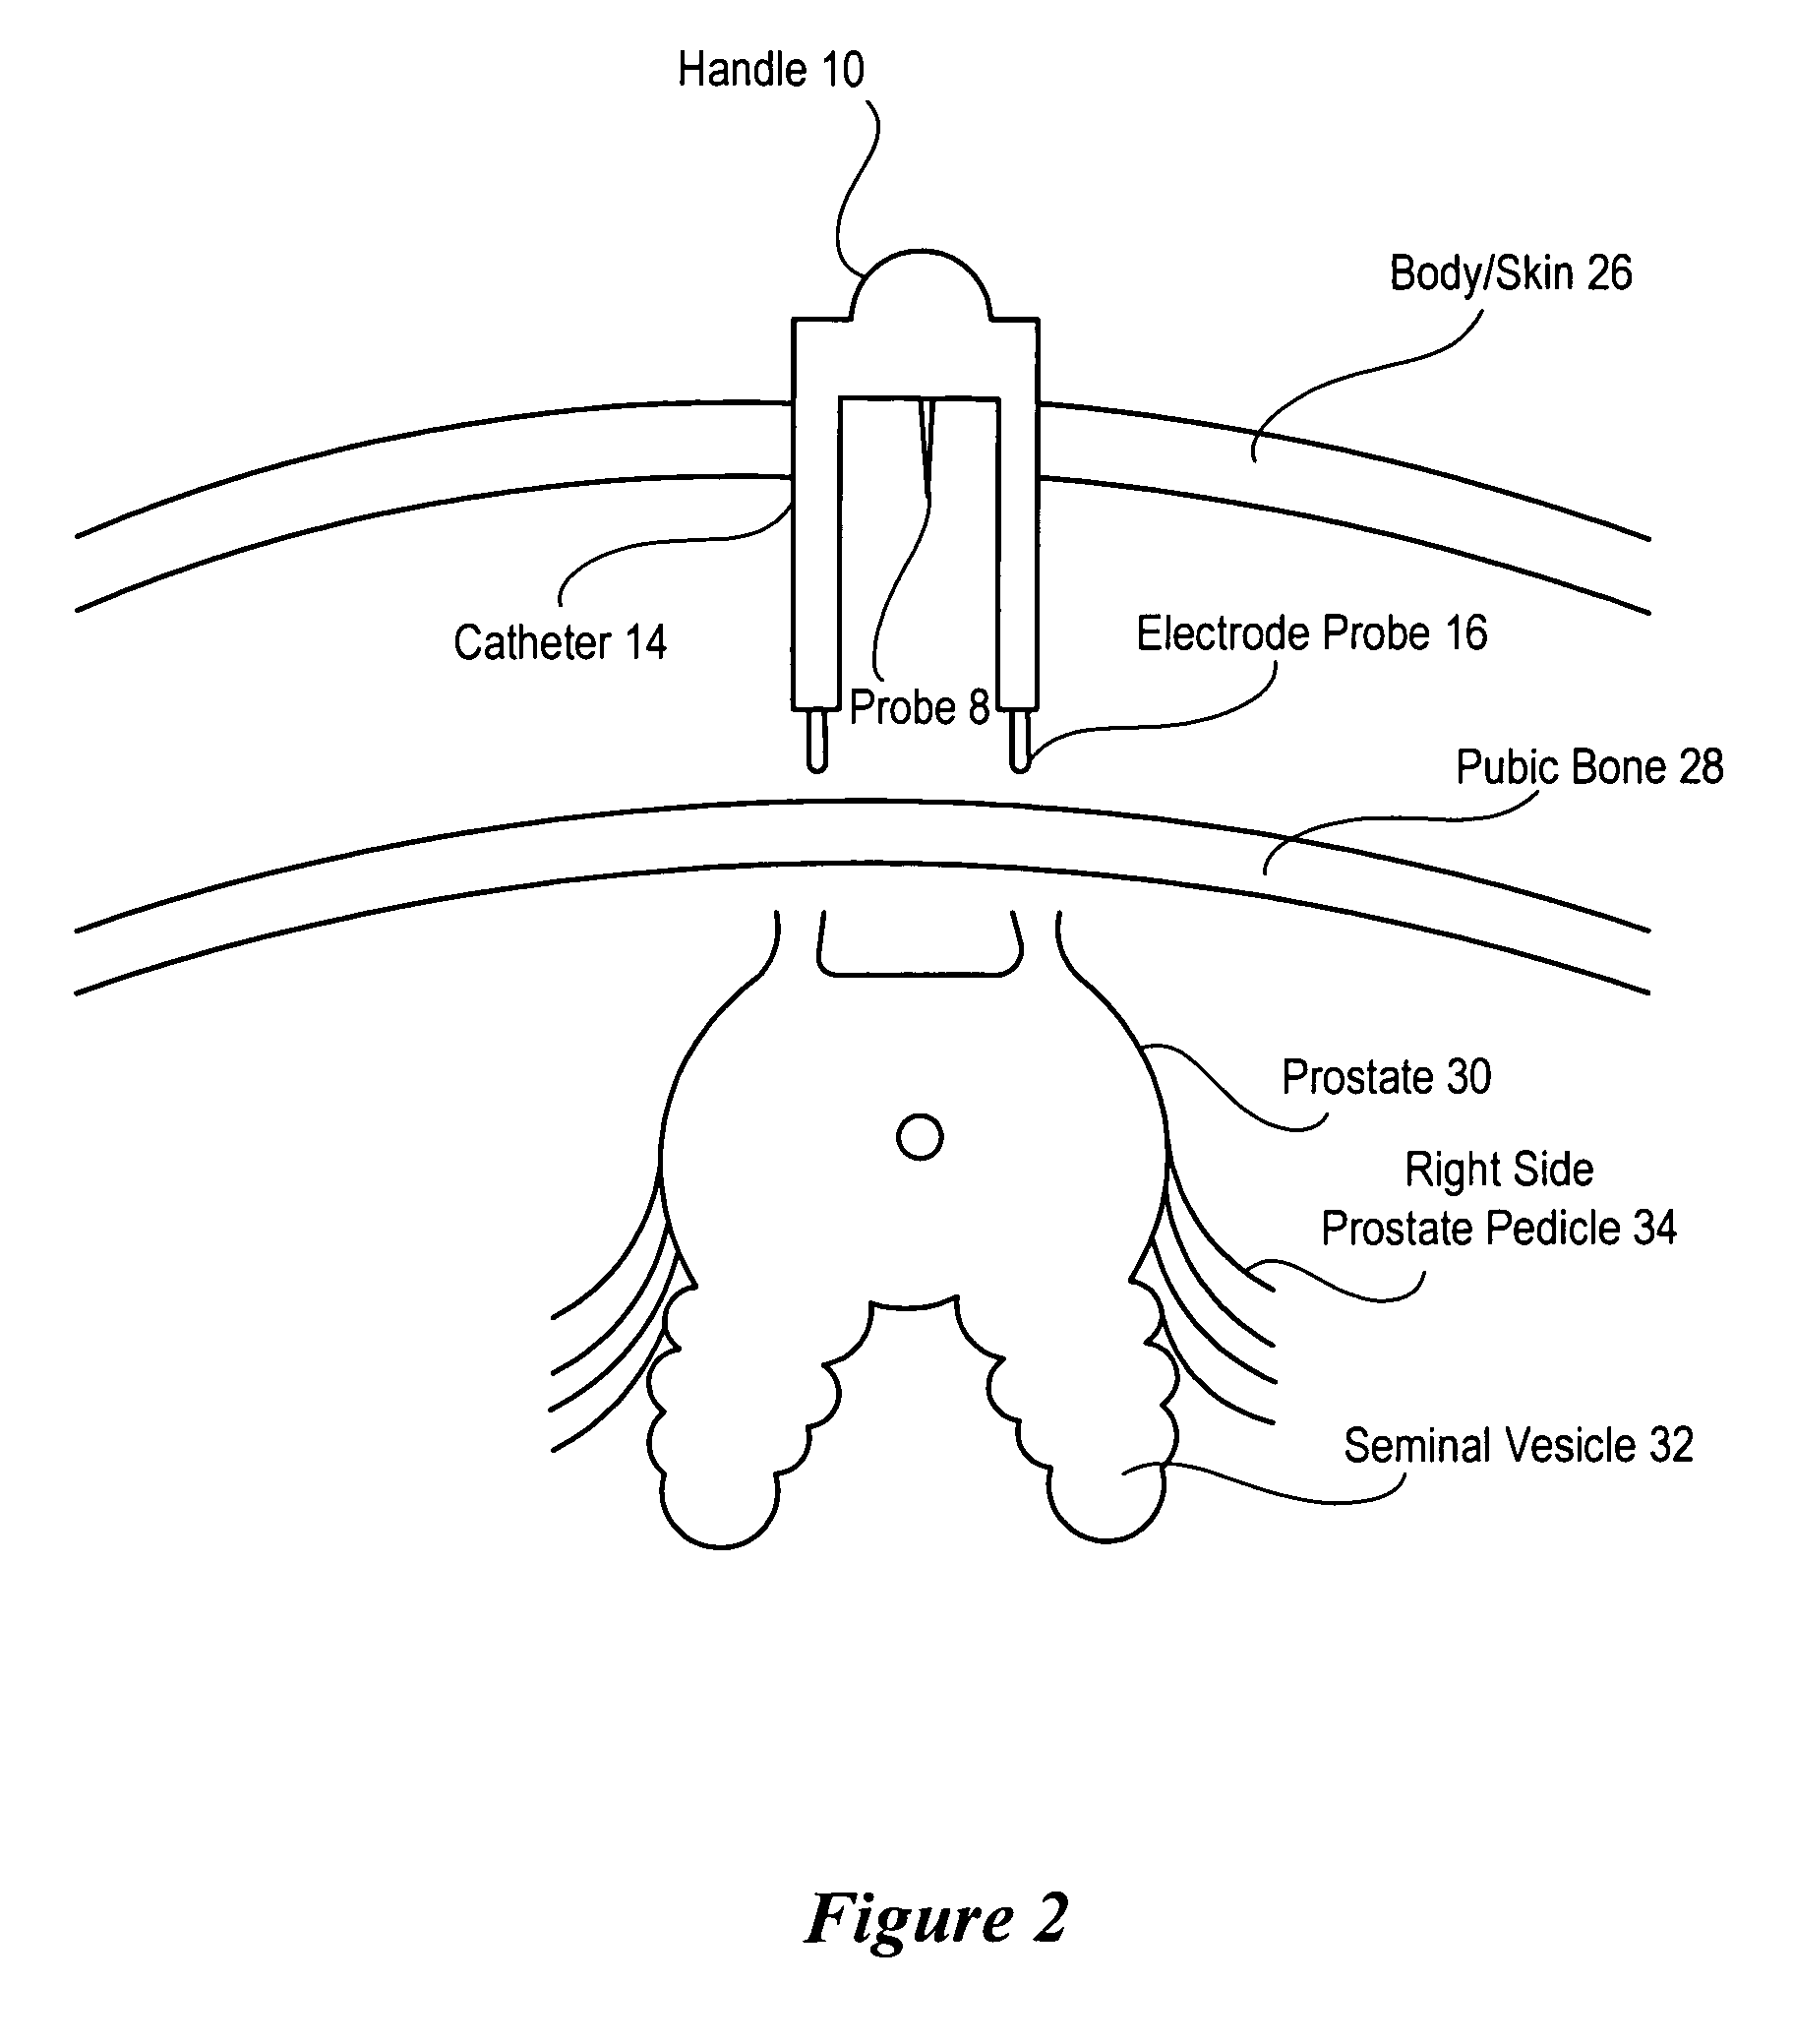 System and method for laparoscopic nerve detection